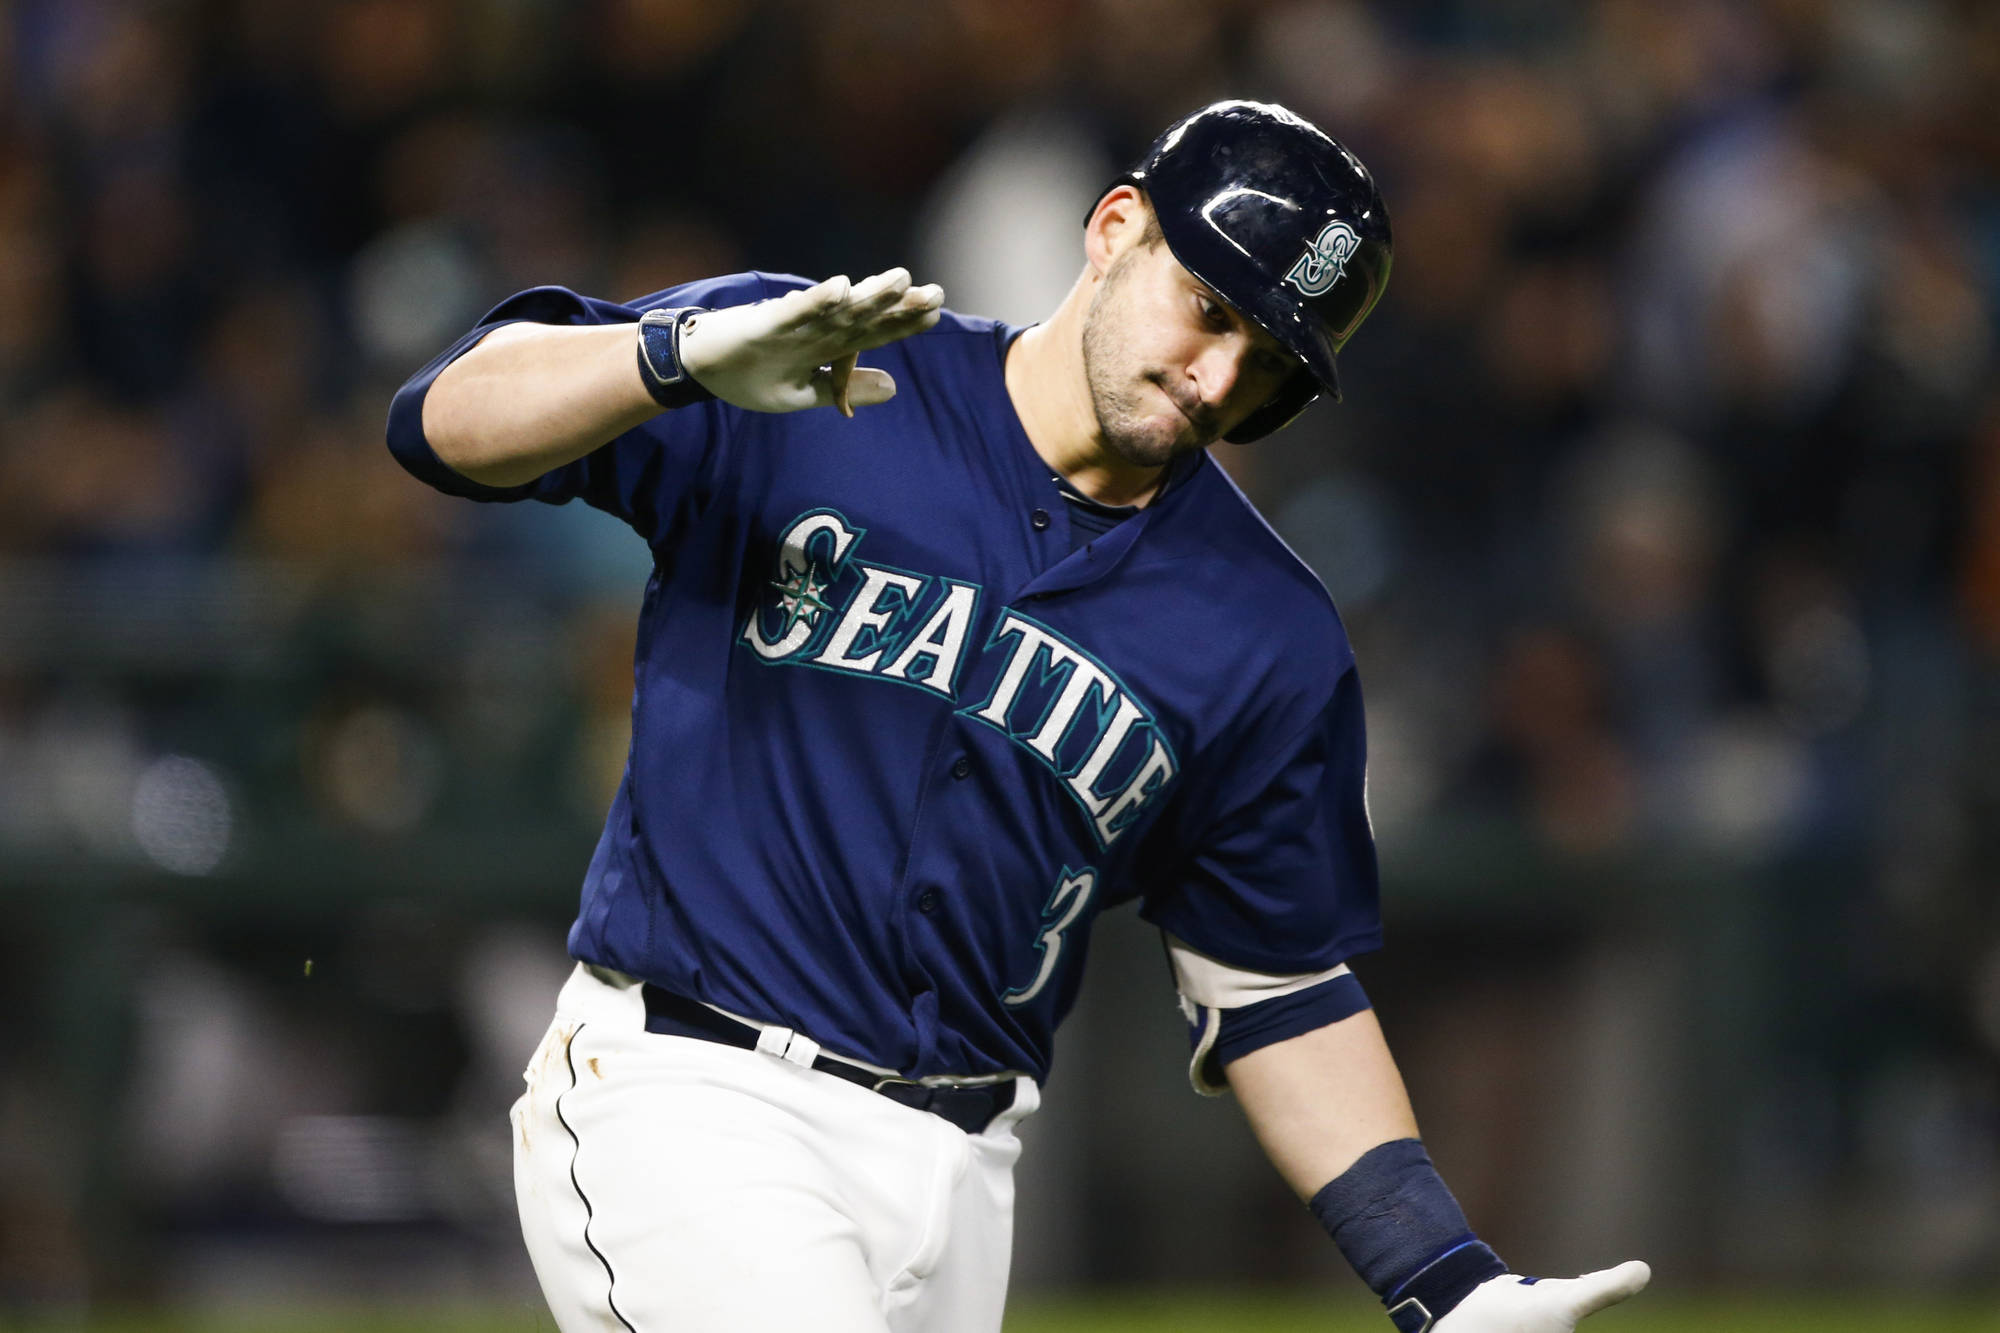 Stayin' alive! Mike Z's clutch homer the difference maker as M's take down A's